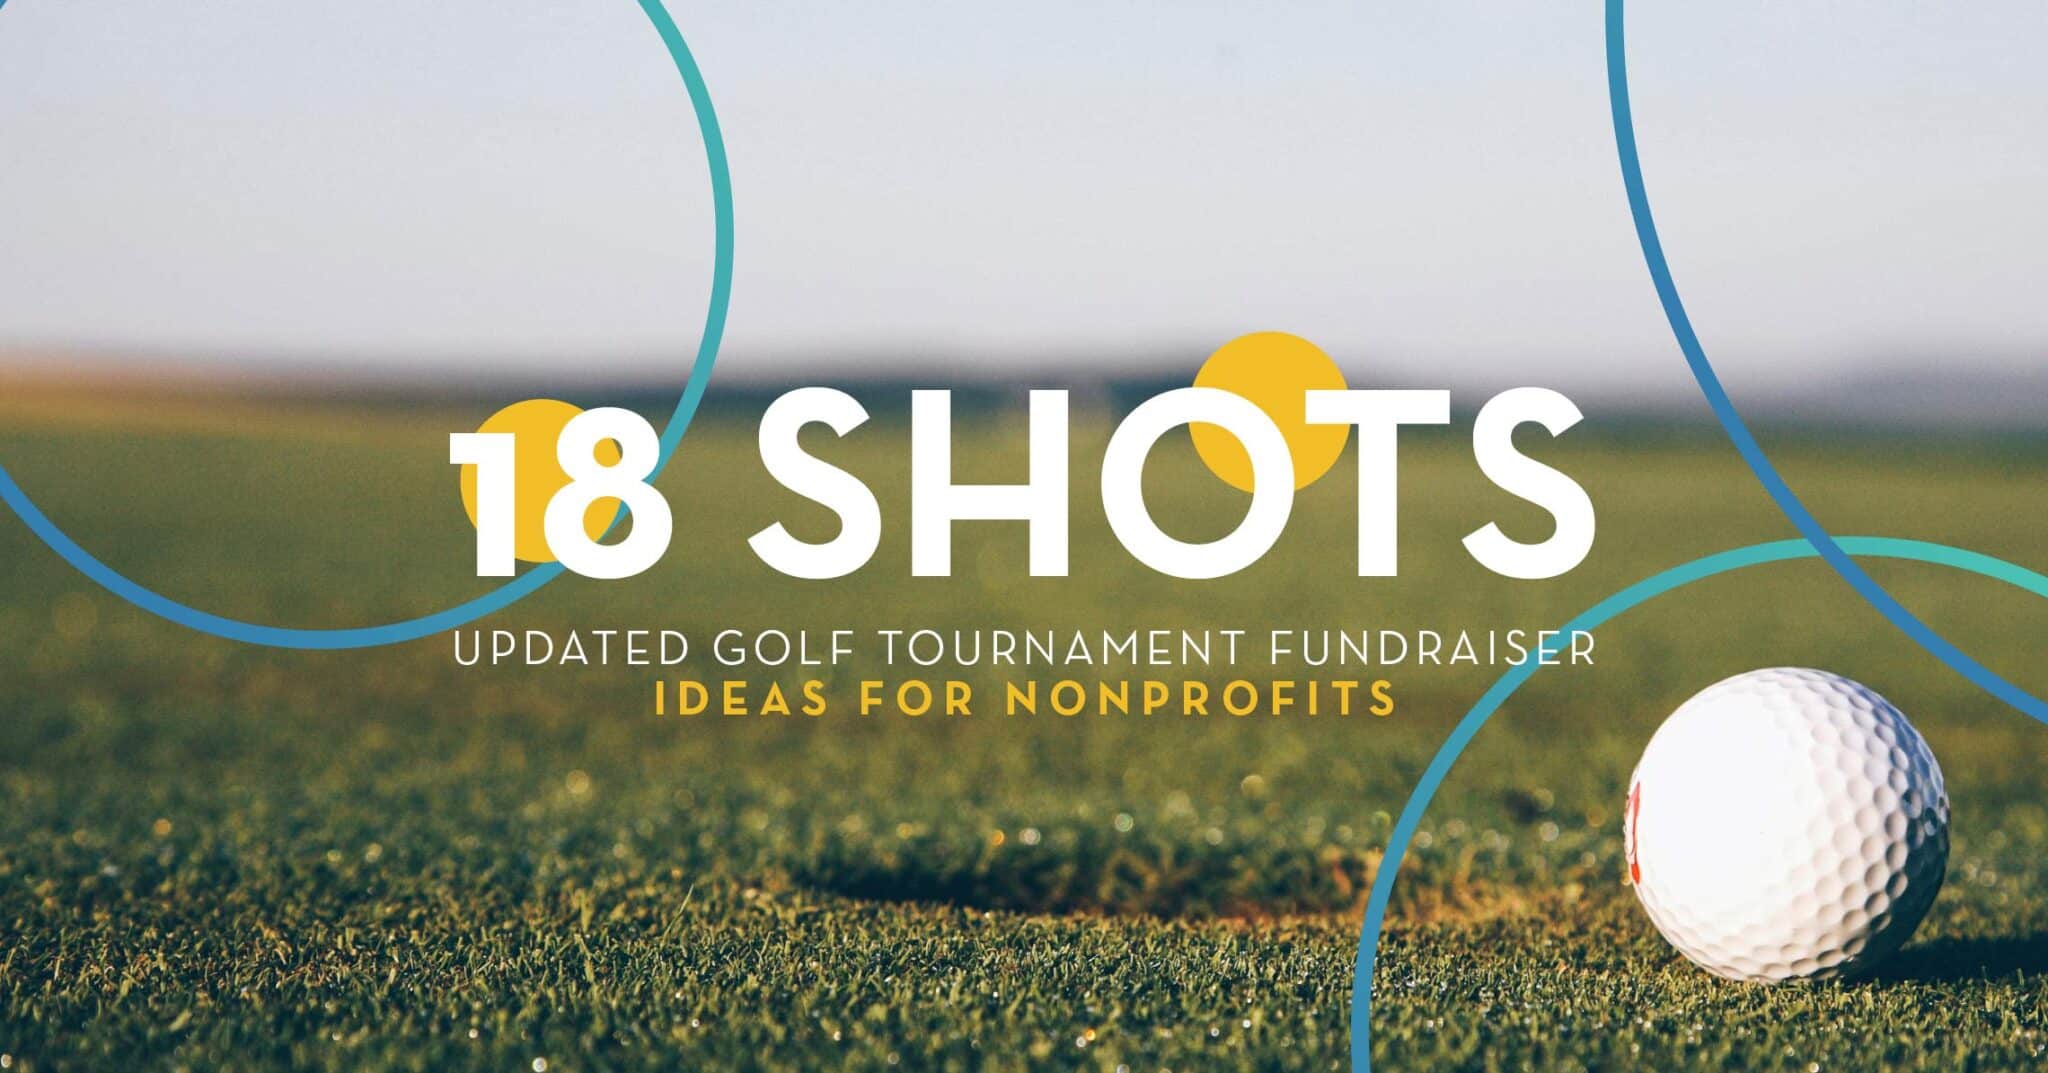 III. Golf Tournaments: A Major Source of Fundraising